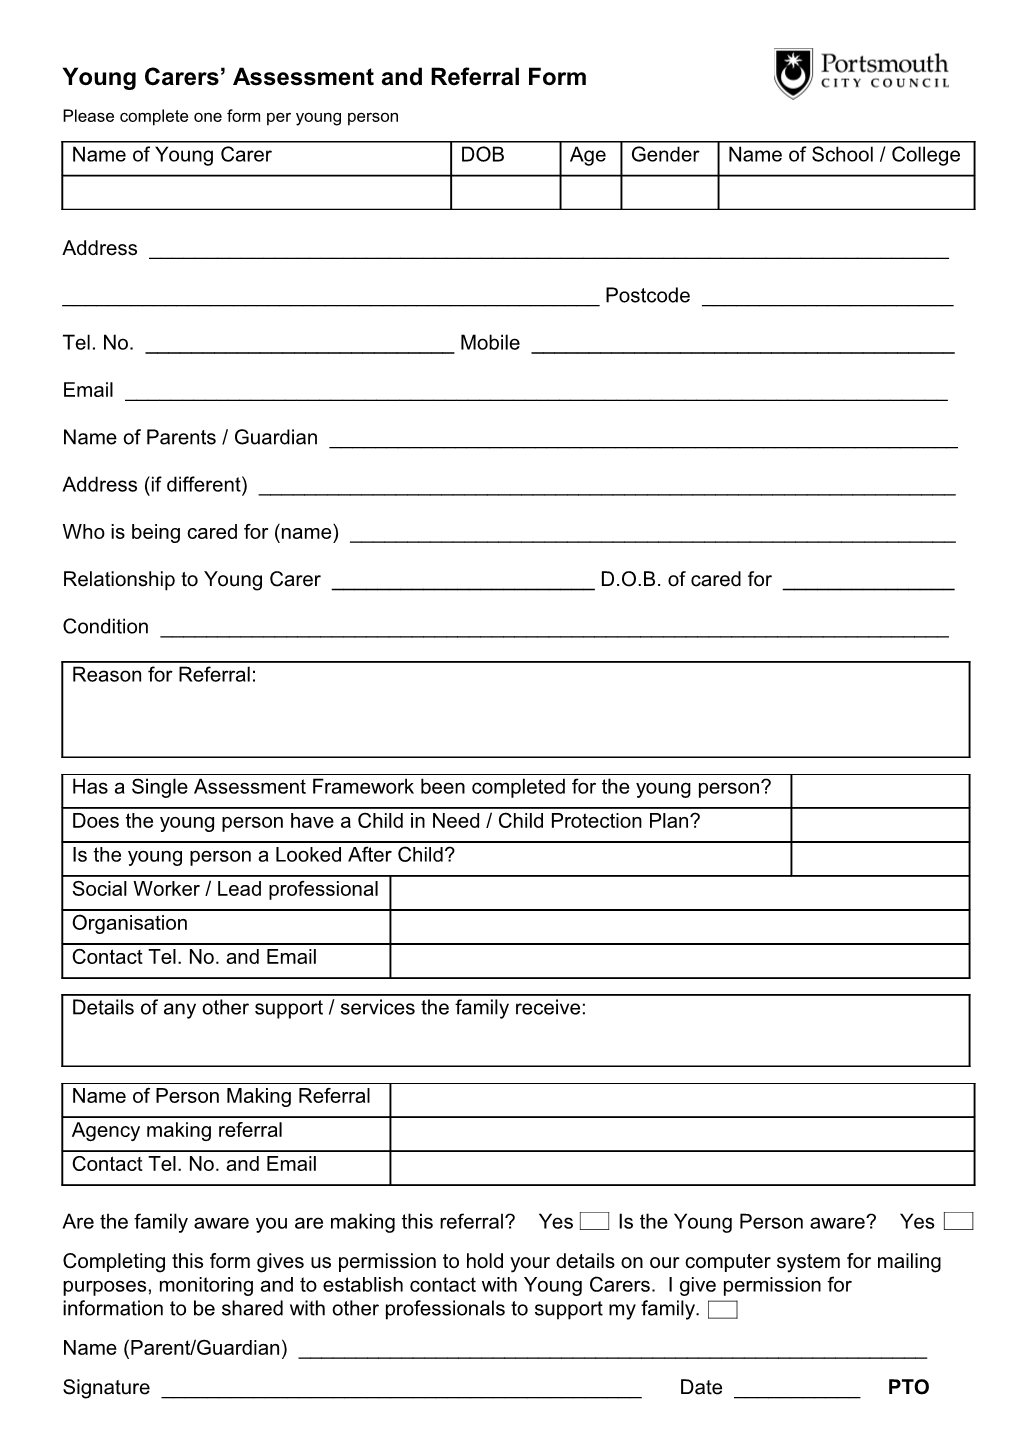 Young Carers Referral Form